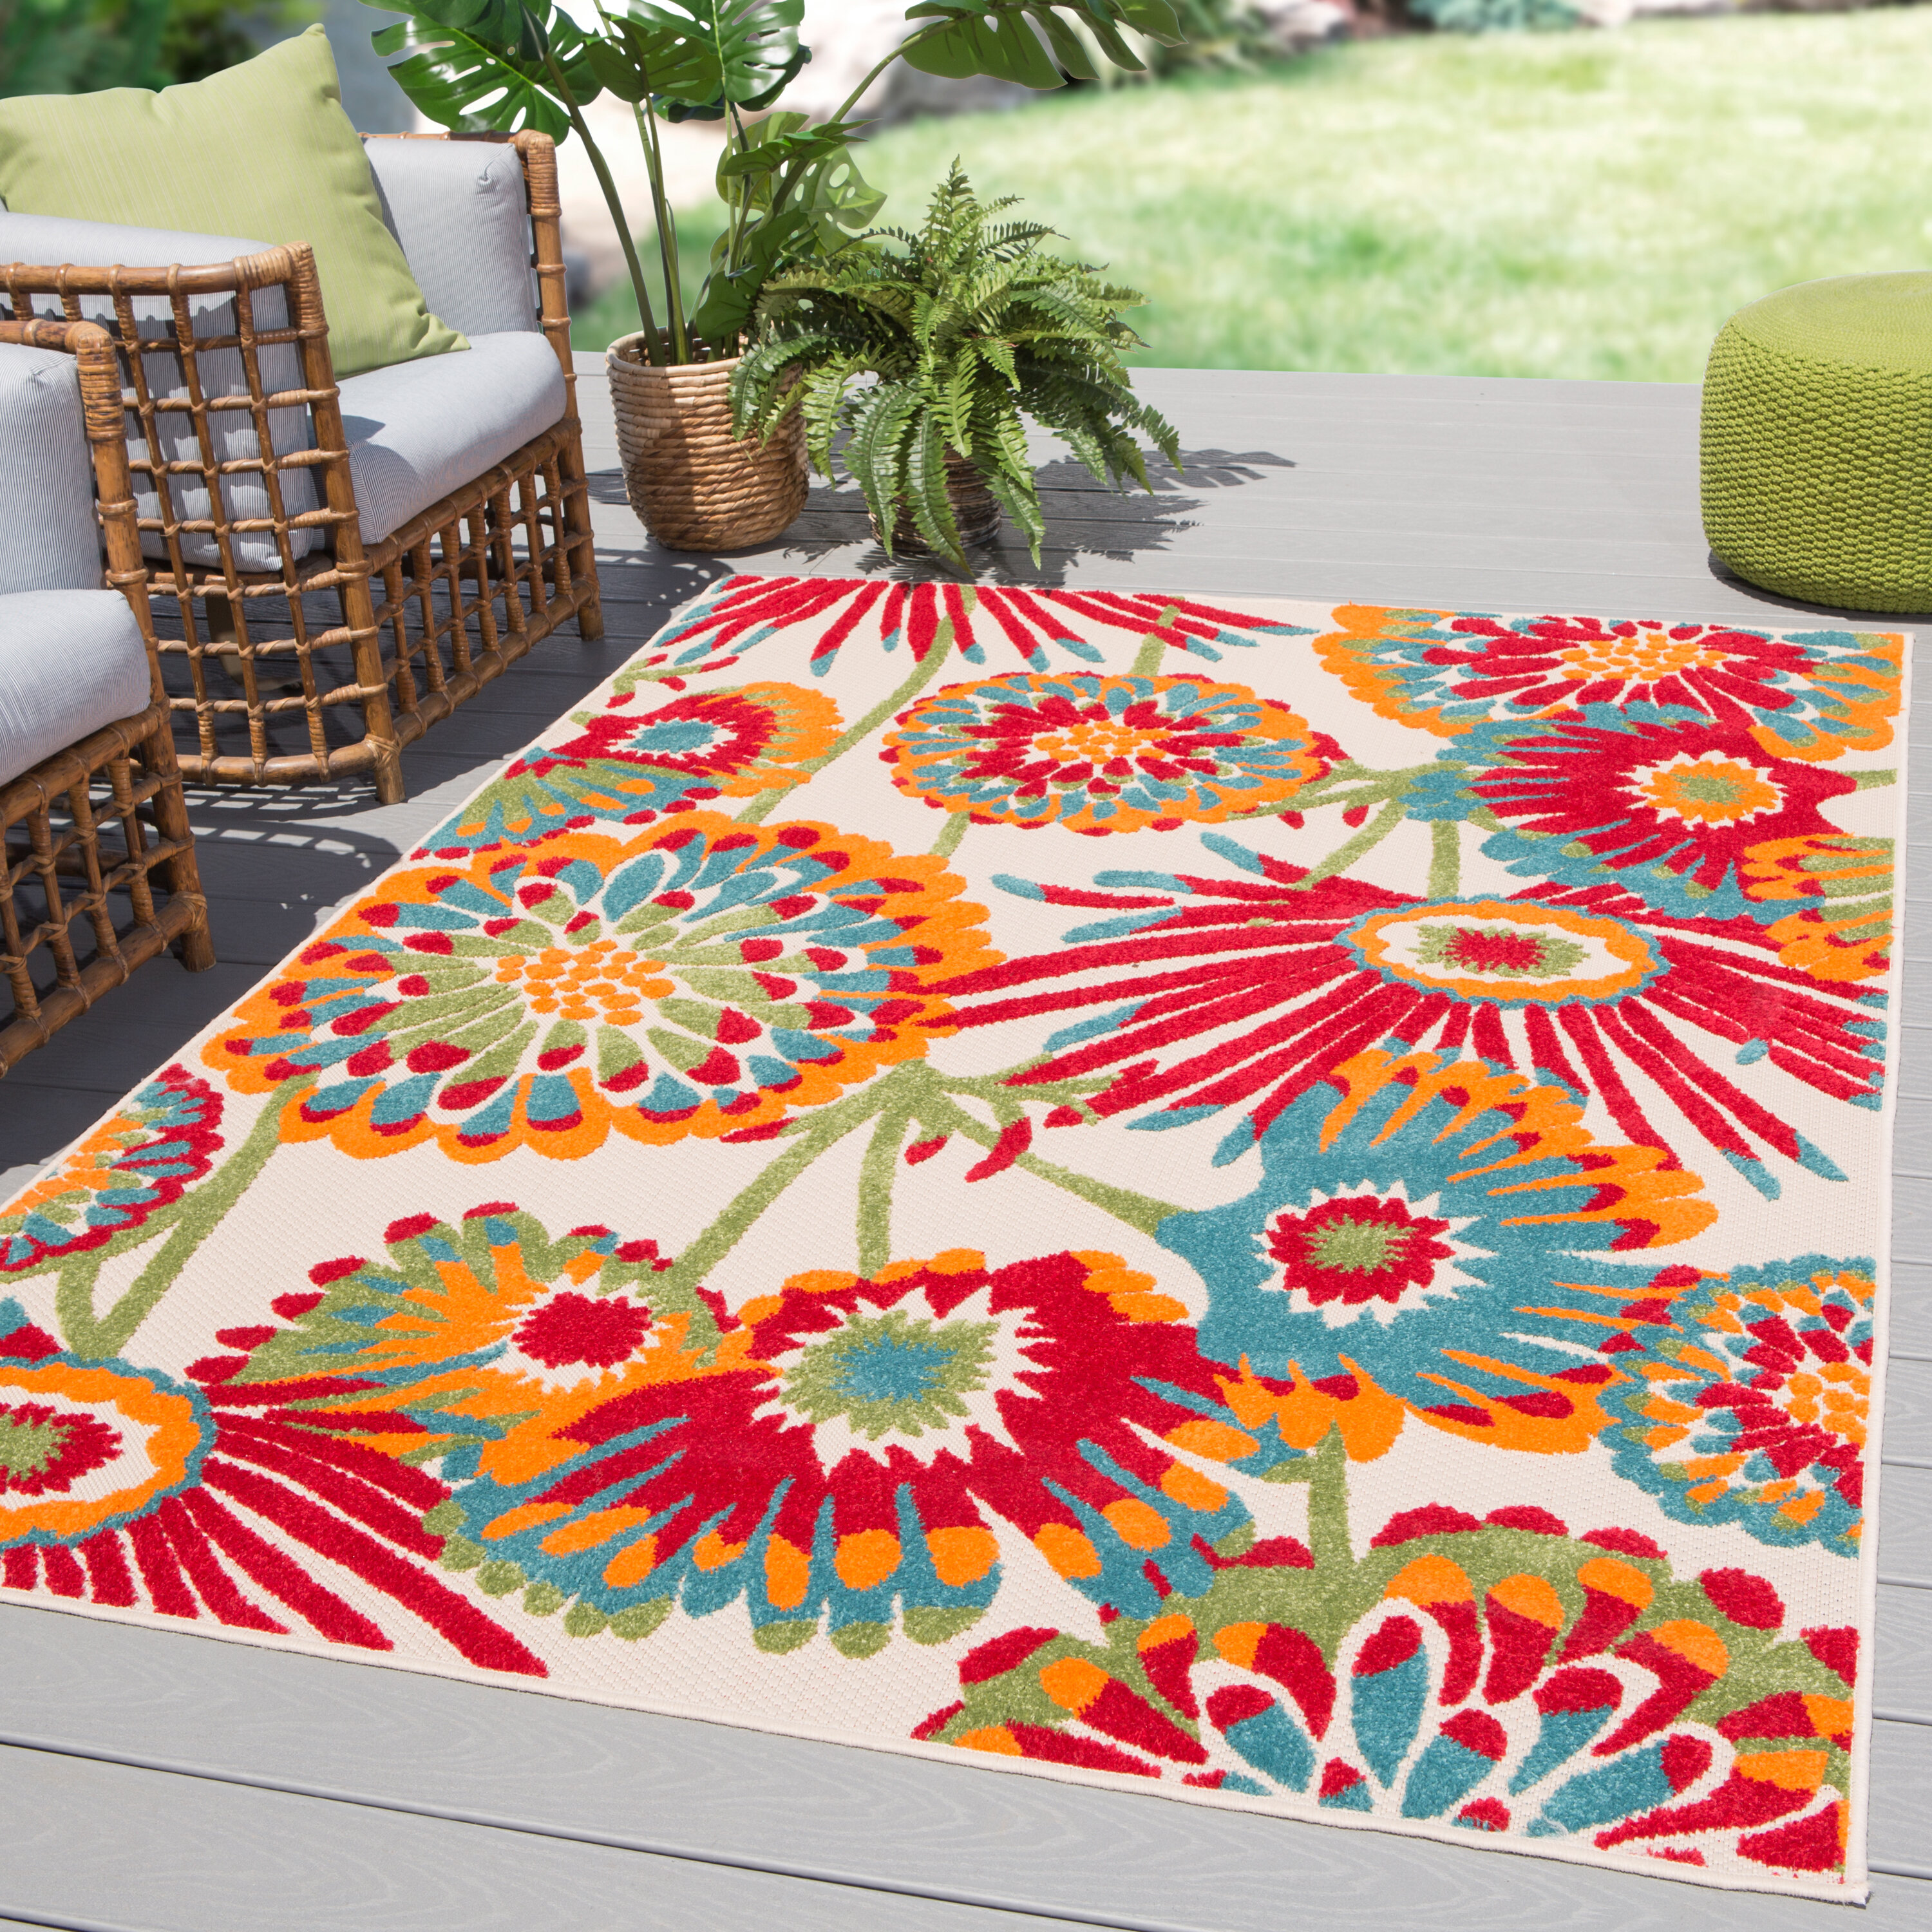 ReStylist Catenya McHenry creates an outdoor space by adding a tabb-floral-redblue-indooroutdoor-area-rug from Wayfair